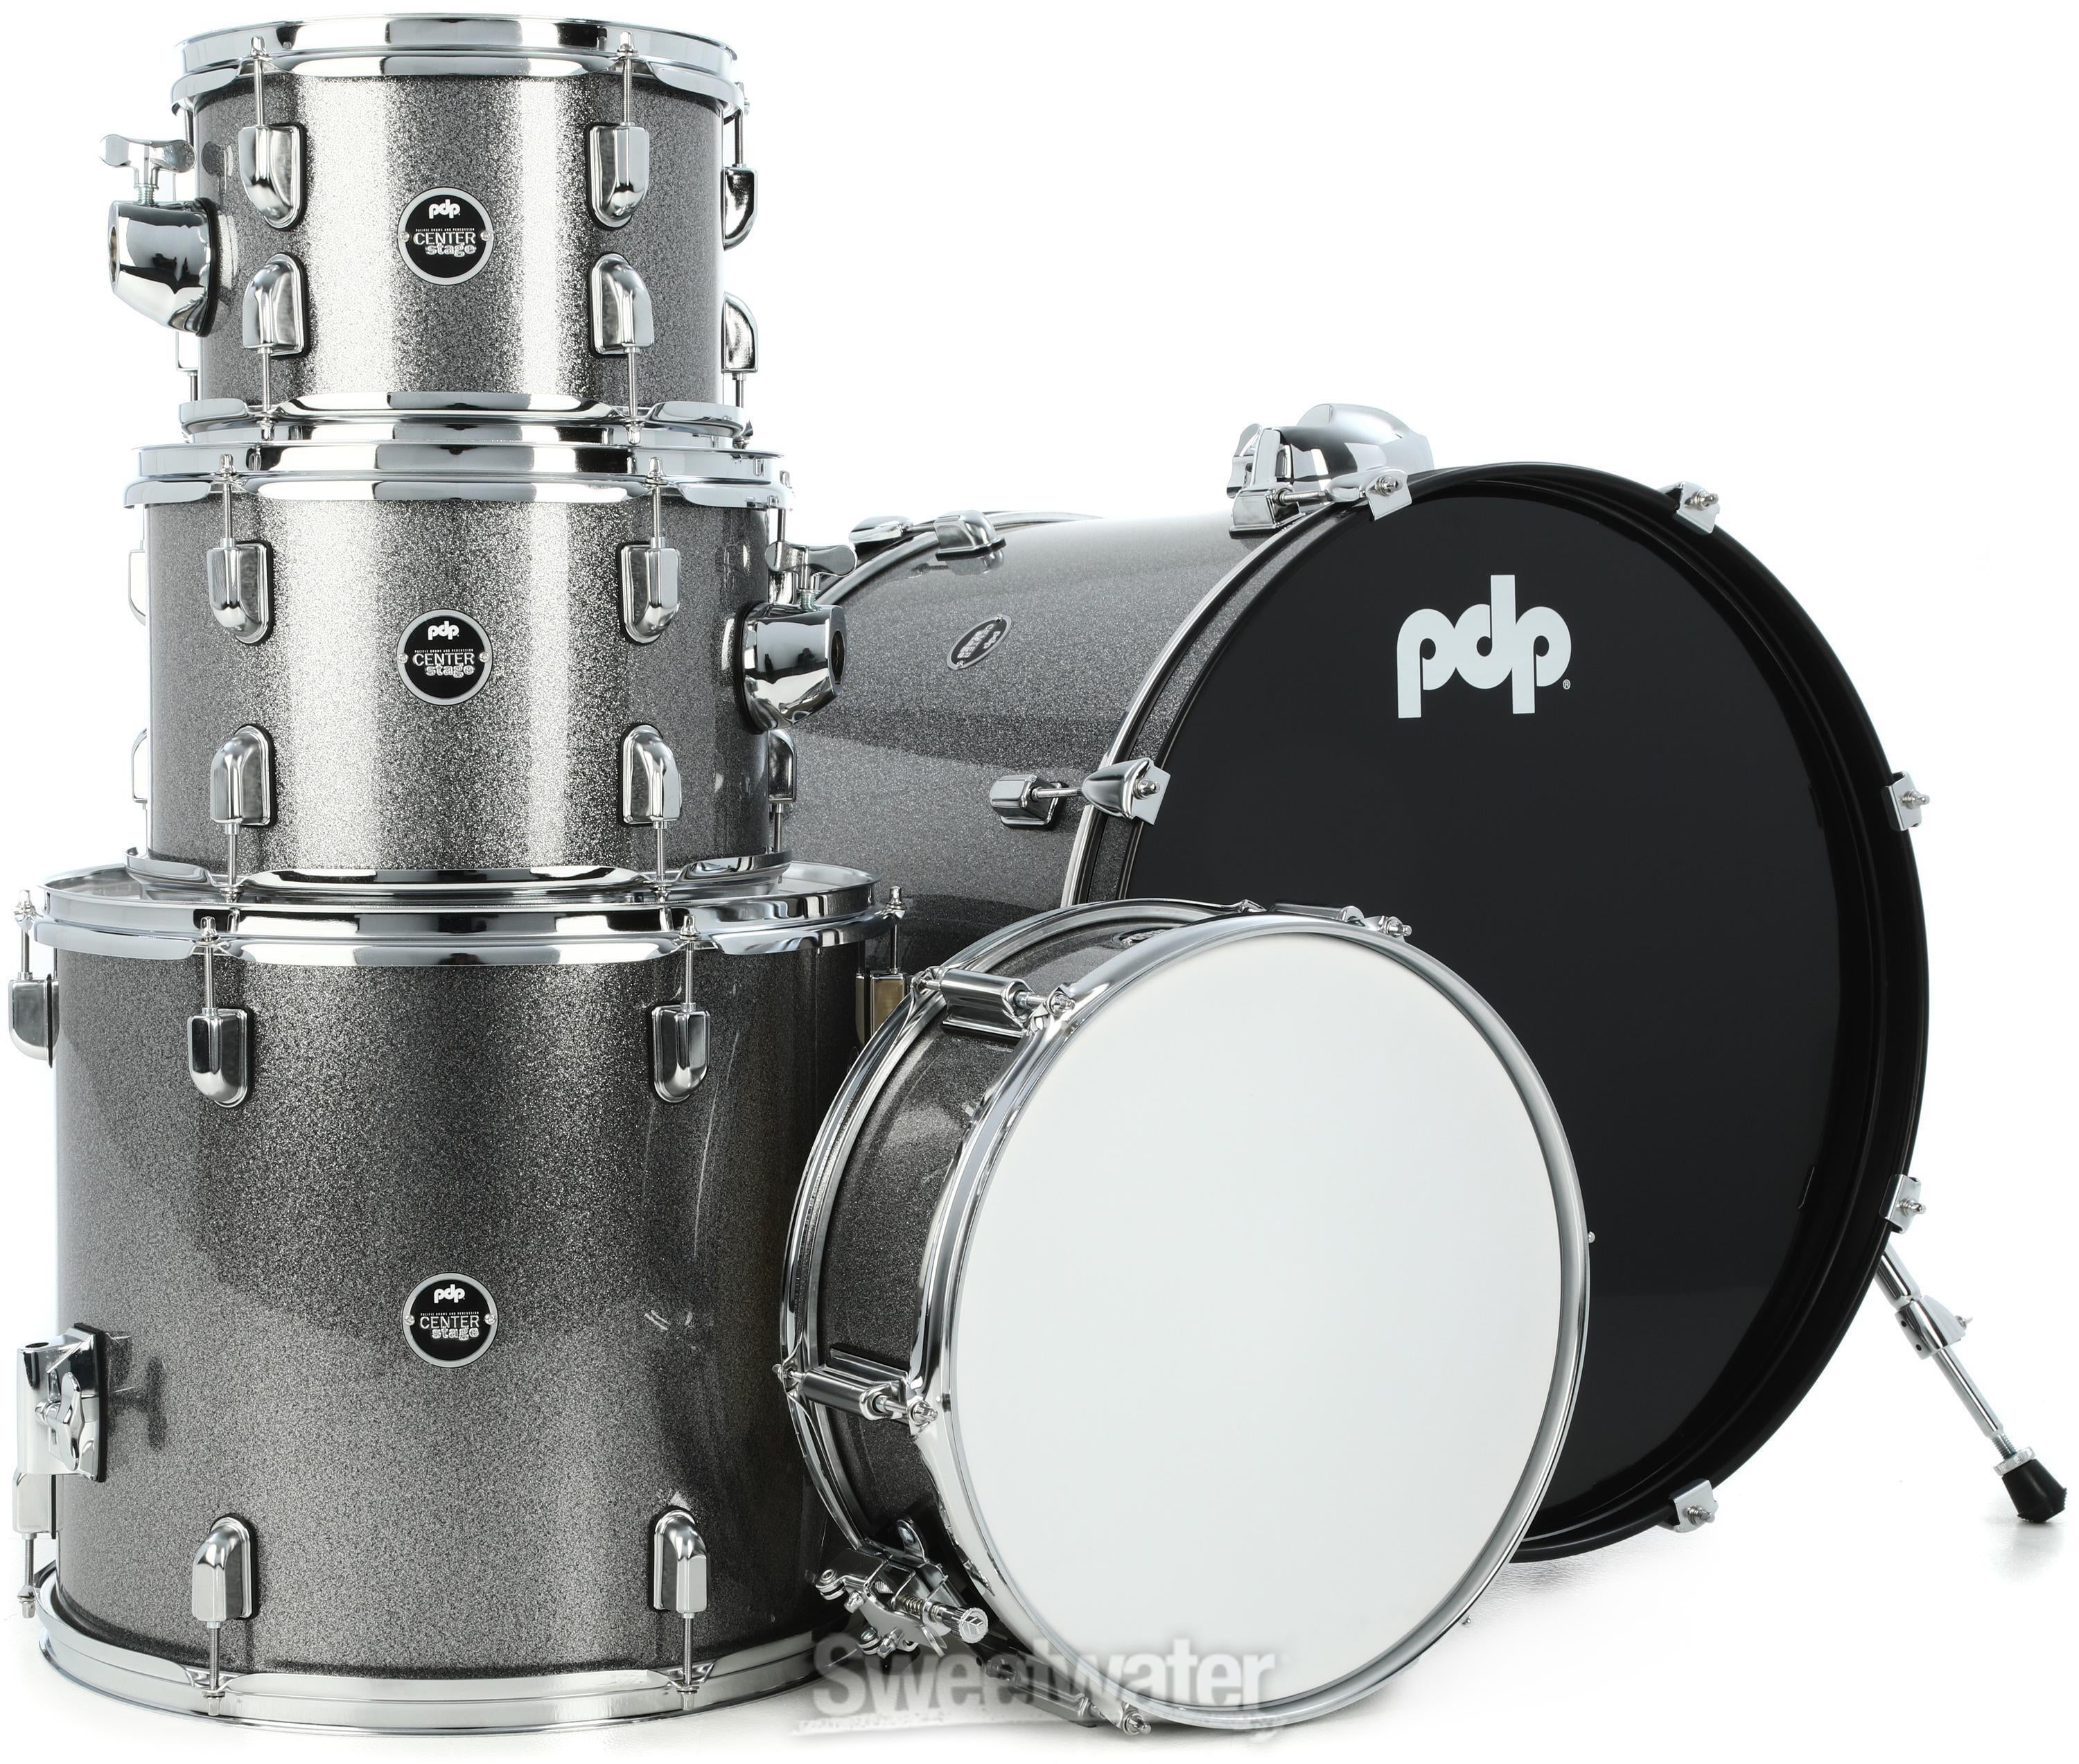 Center Stage PDCE2215KTSS 5-piece Complete Drum Set with Cymbals